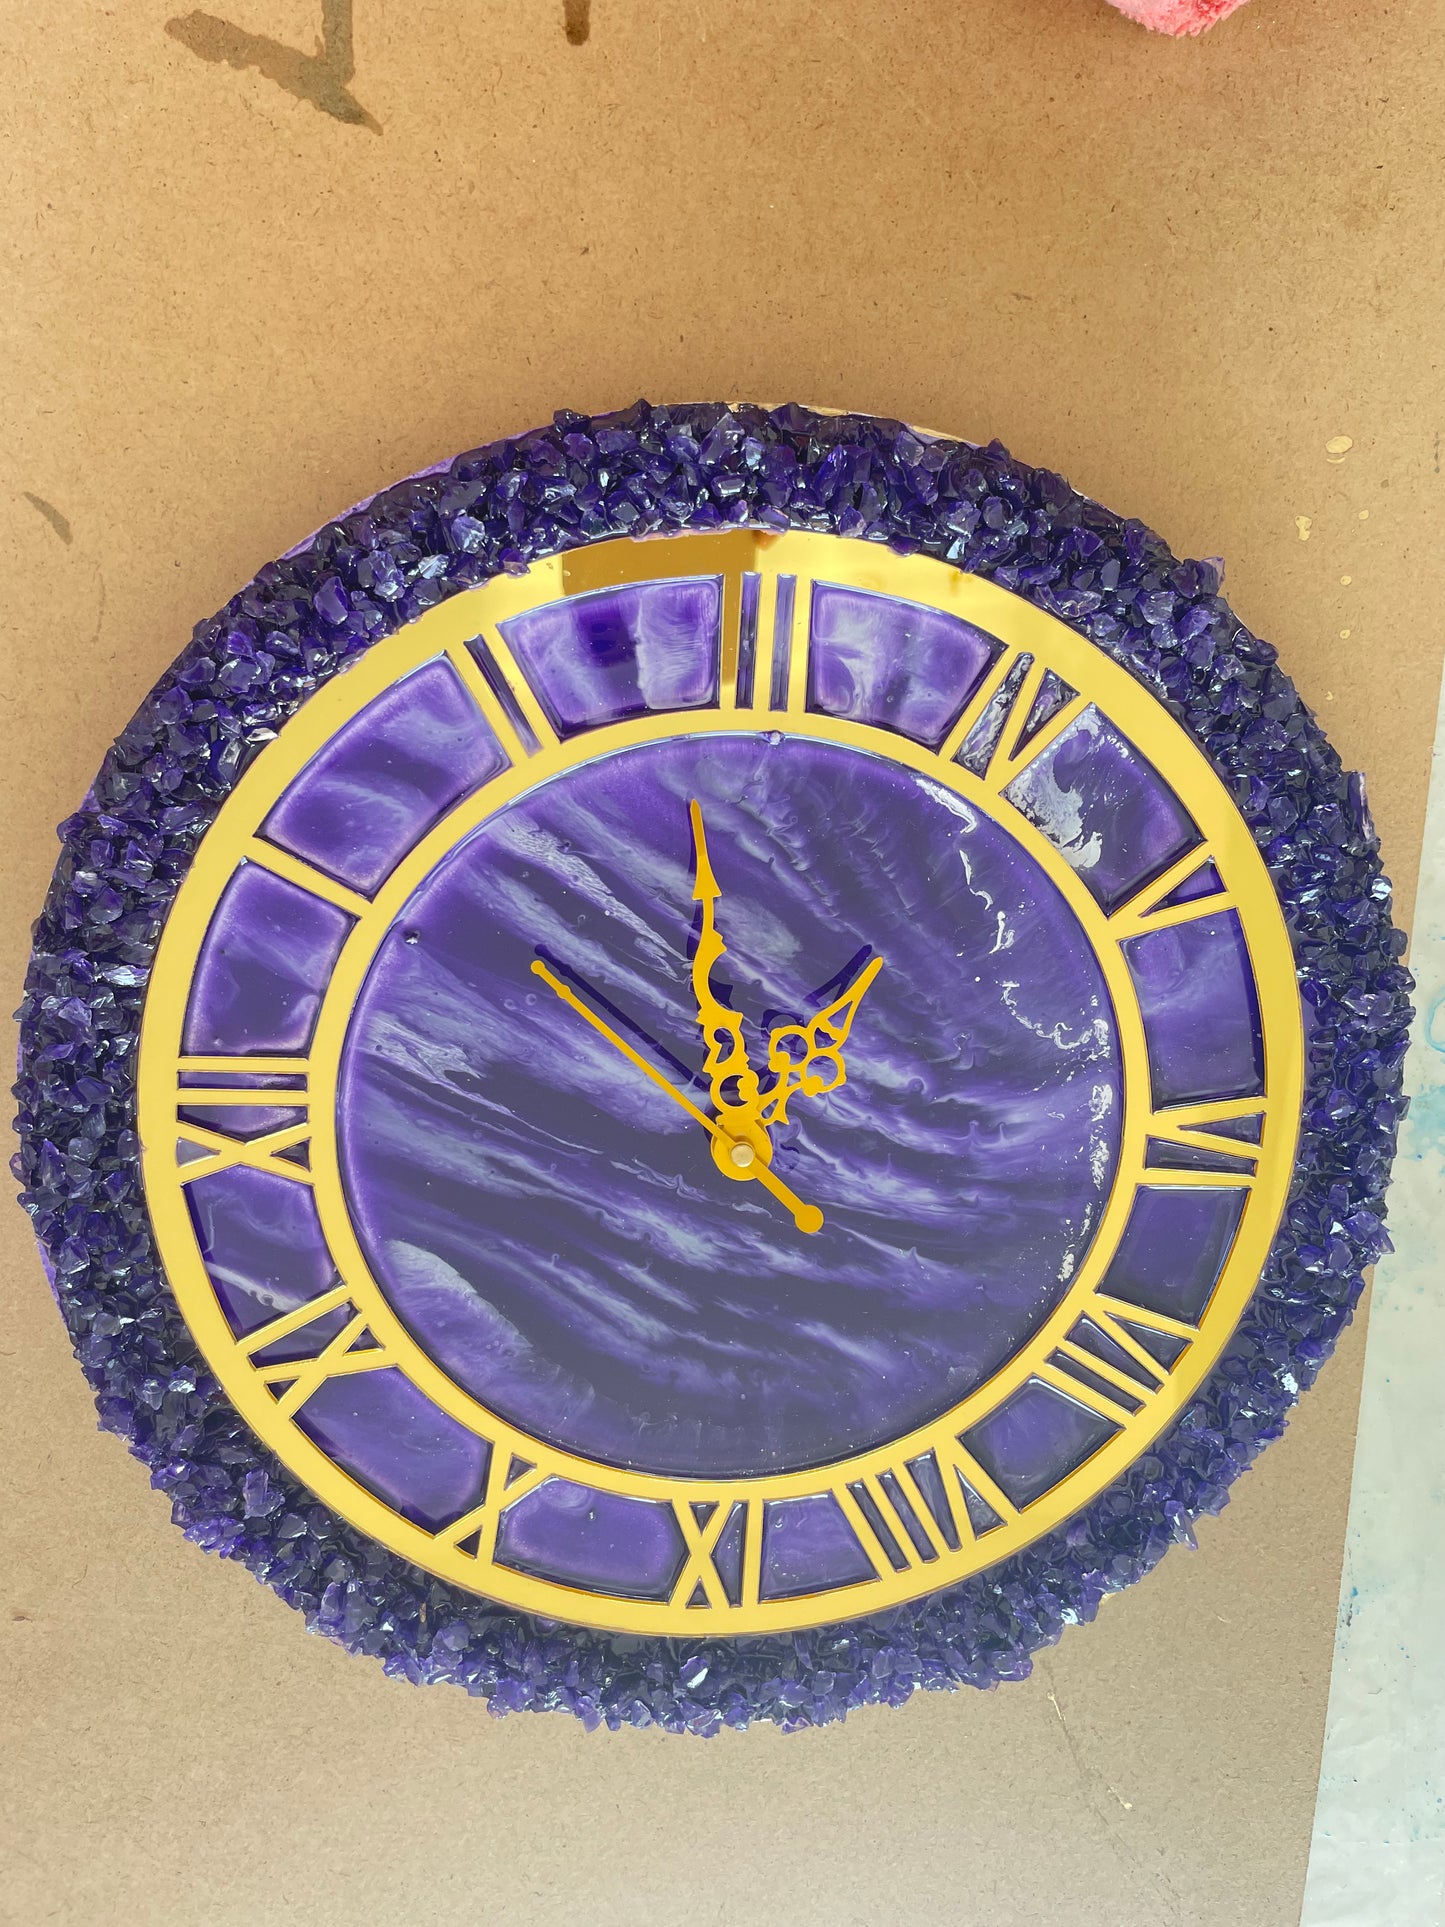 12 inch Epoxy Resin Clock Workshop | Saturday 2nd March or Sunday 3rd March